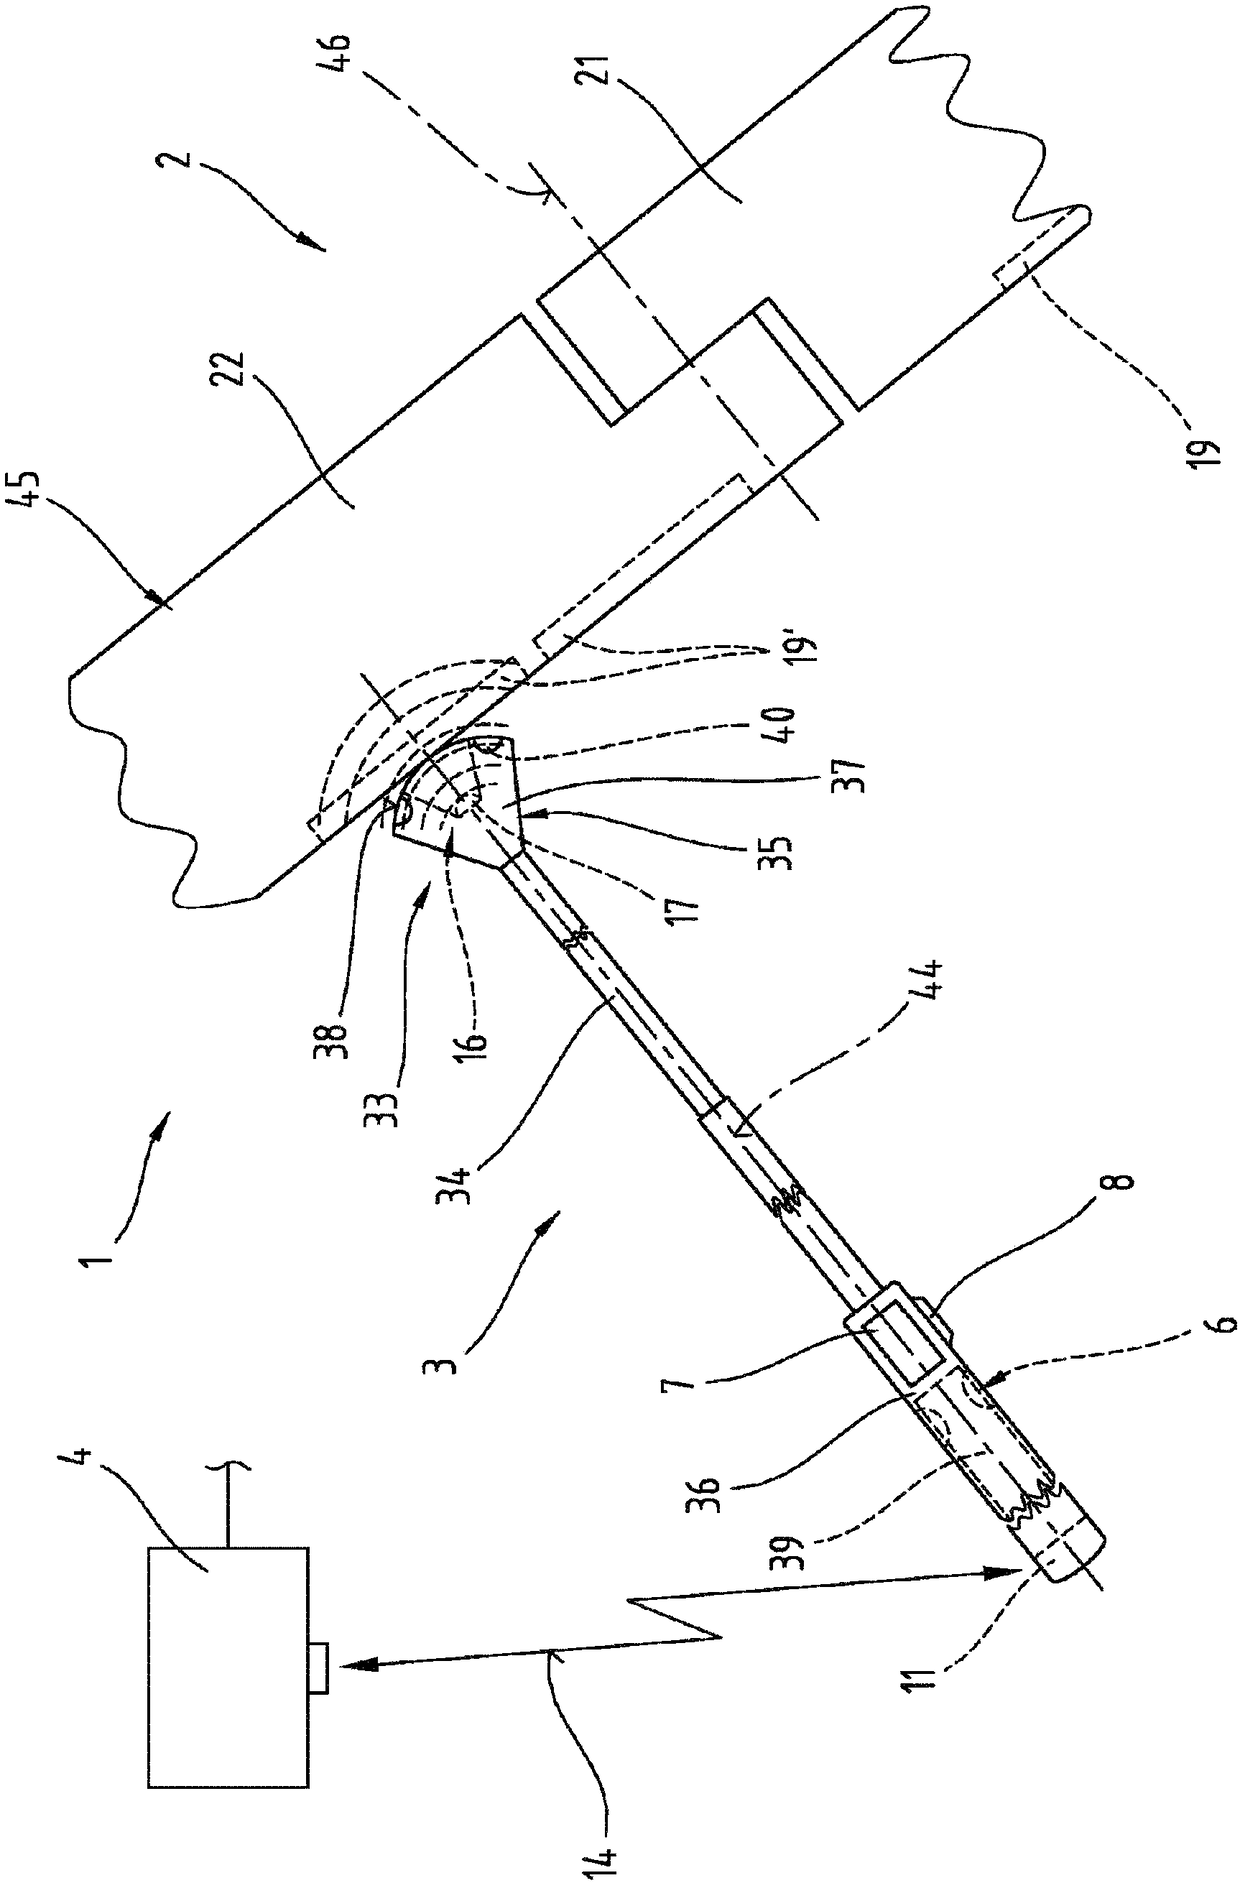 Method, control system, and movement setting means for controlling the movements of articulated arms of an industrial robot